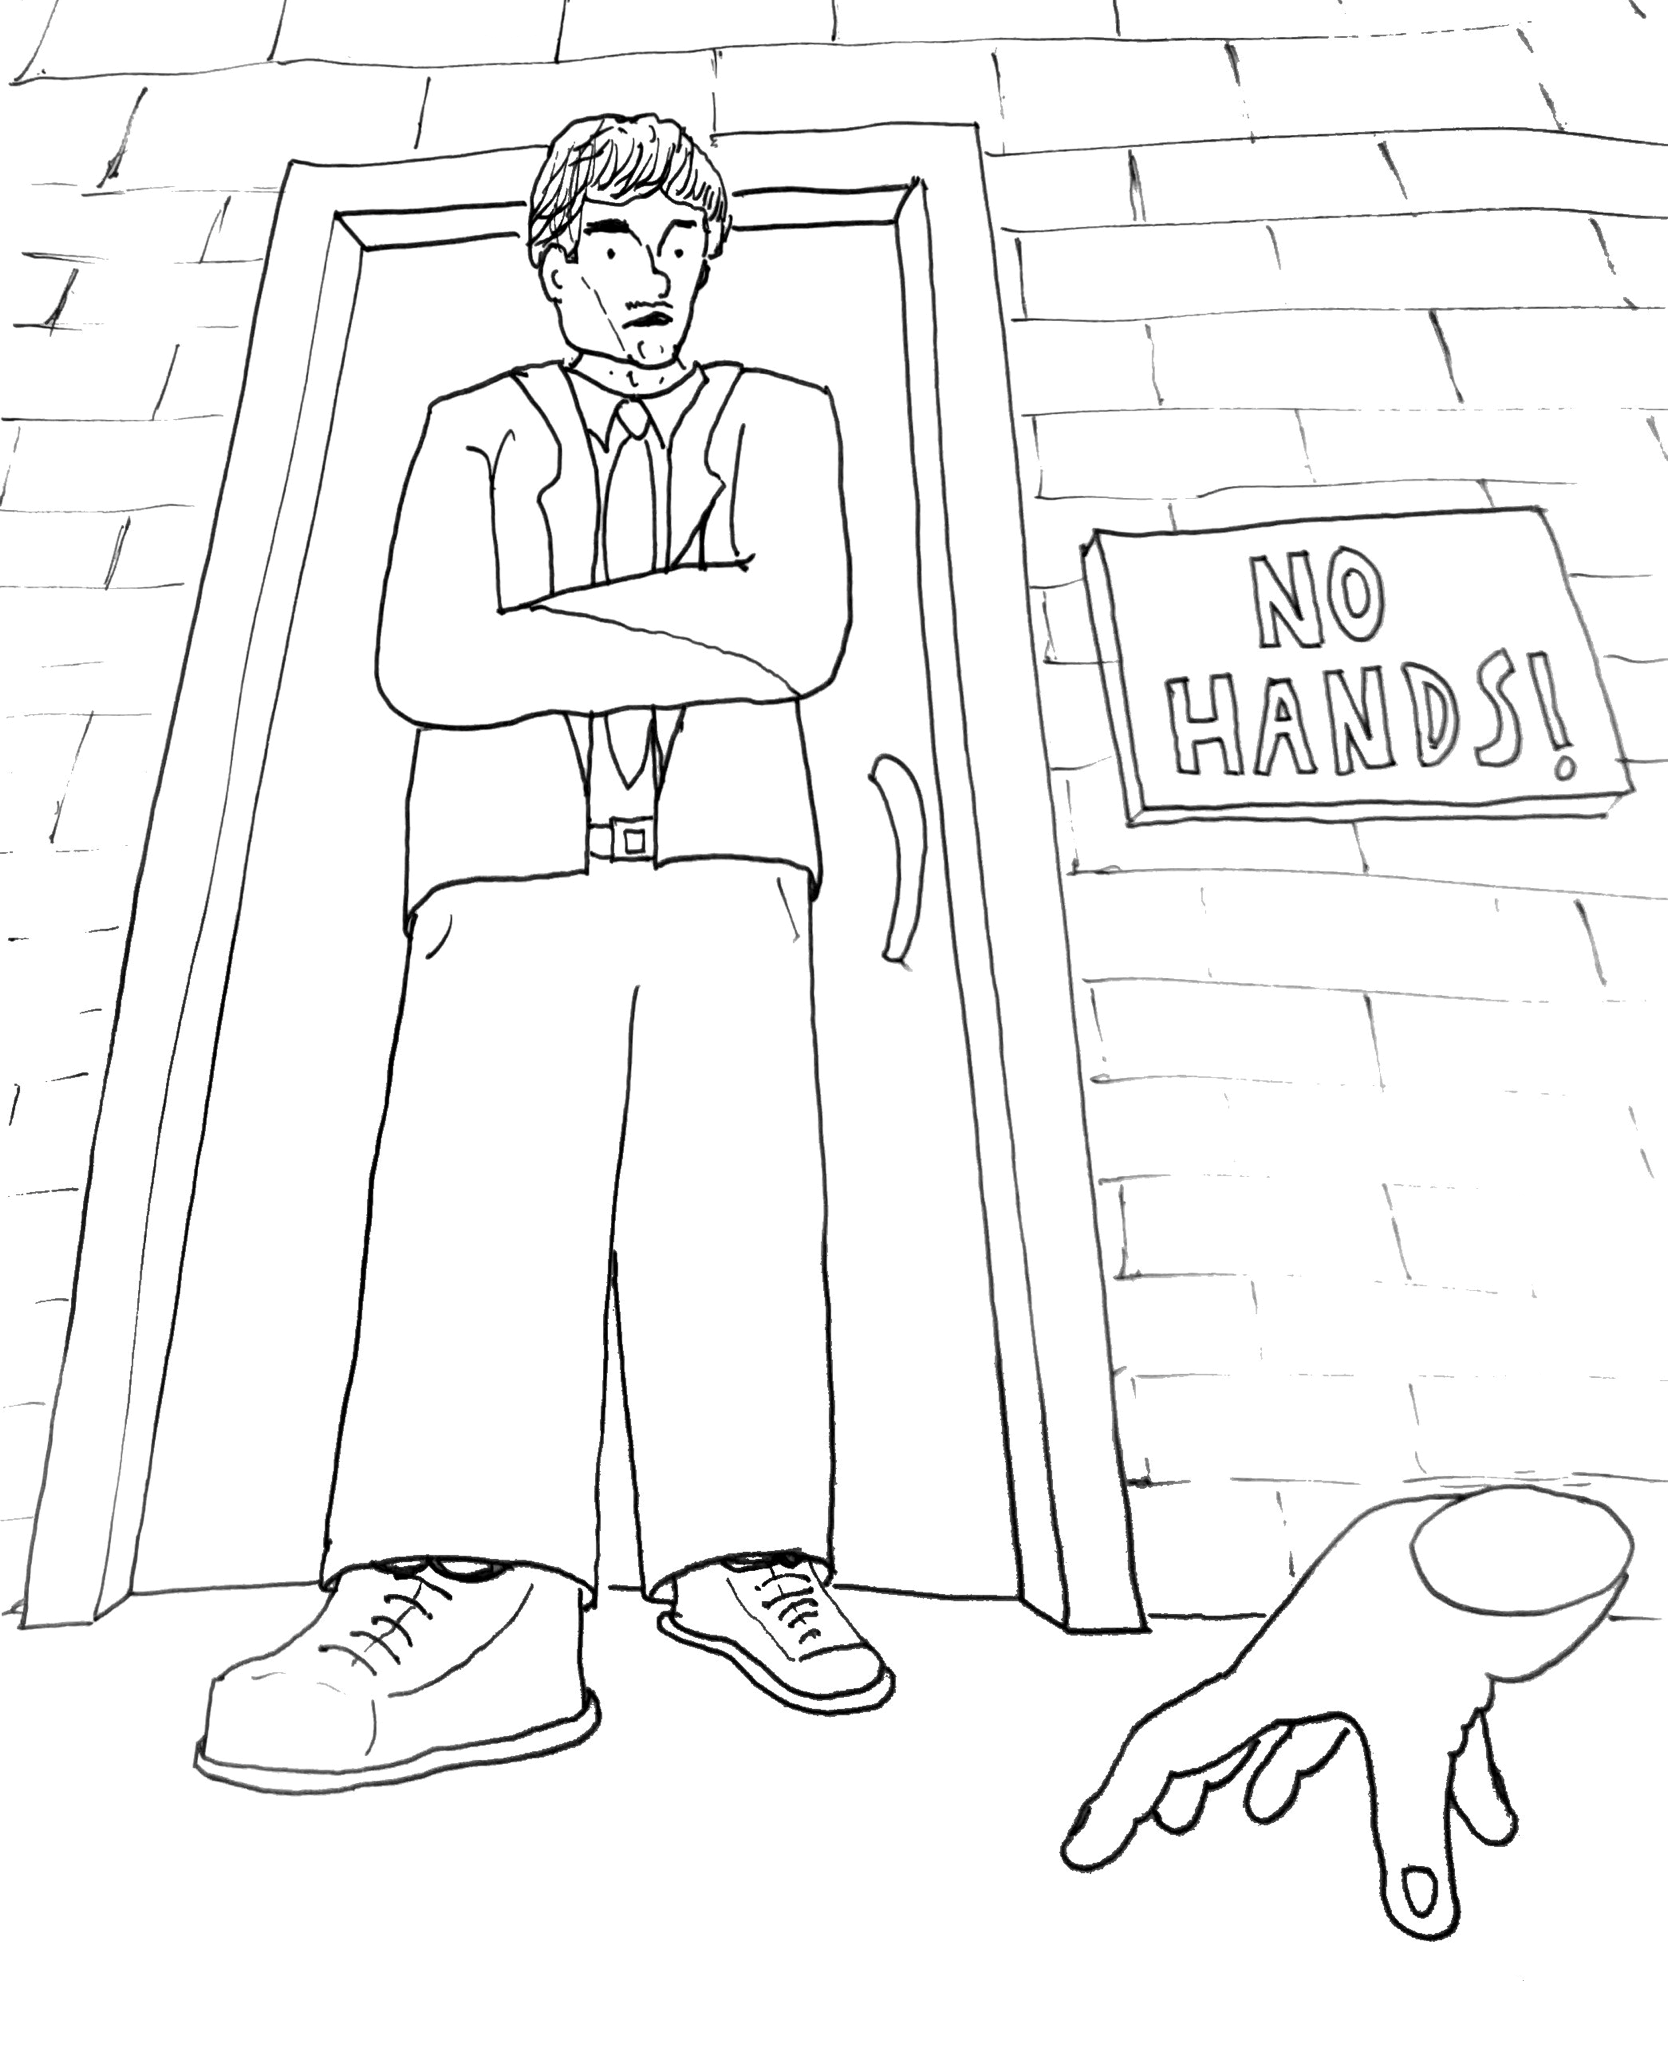 Low perspective of a dismembered hand (like from the Addams Family) peering up at an imposing man in doorway with crossed arms. Next to him is a sign saying “NO HANDS!